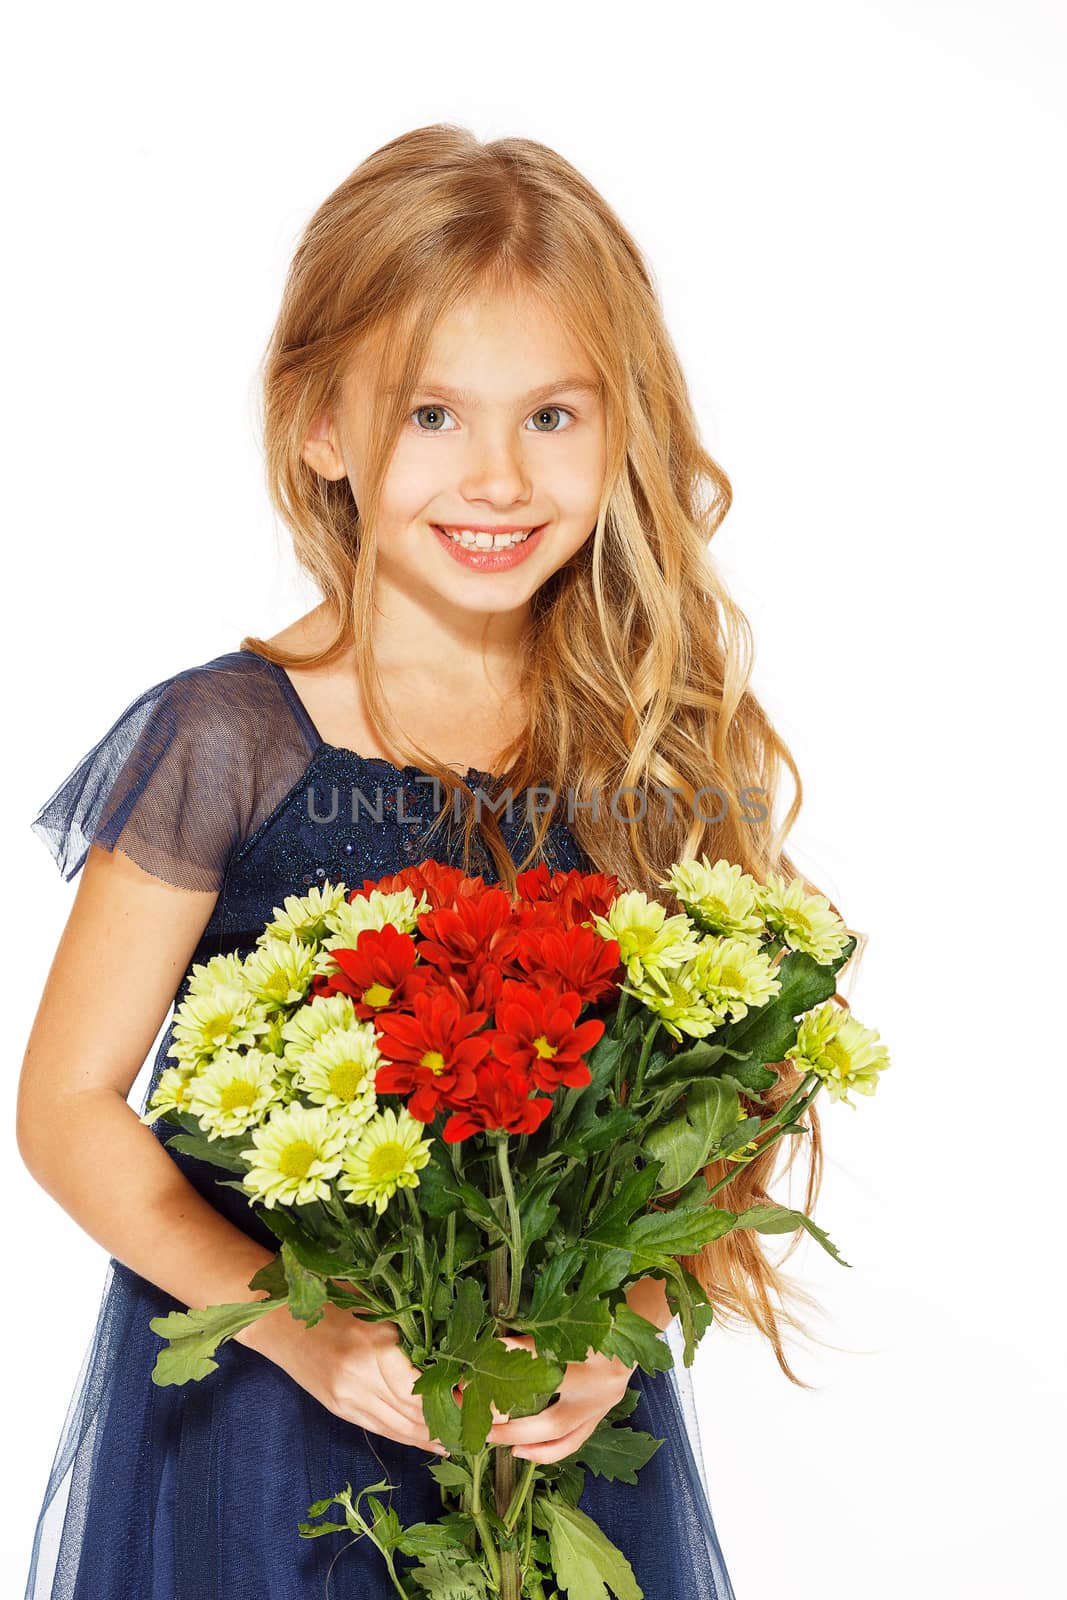 Beautiful little girl with a bouquet of flowers by gorov108